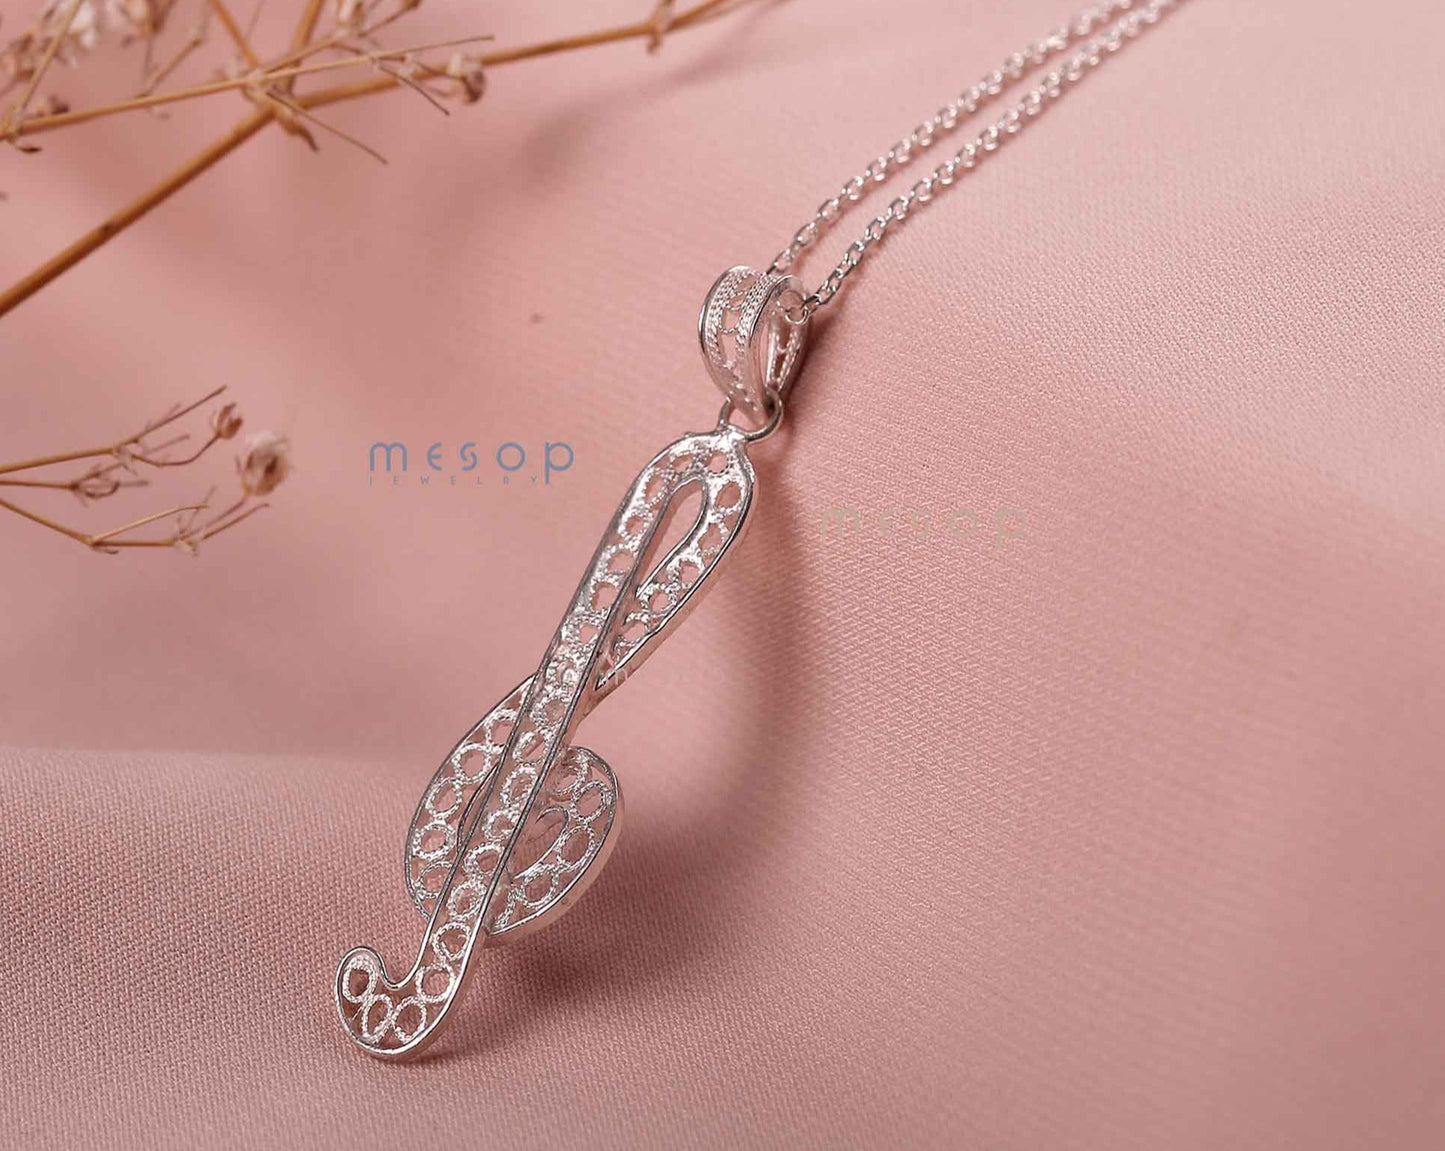 Threads of Melody Pendant